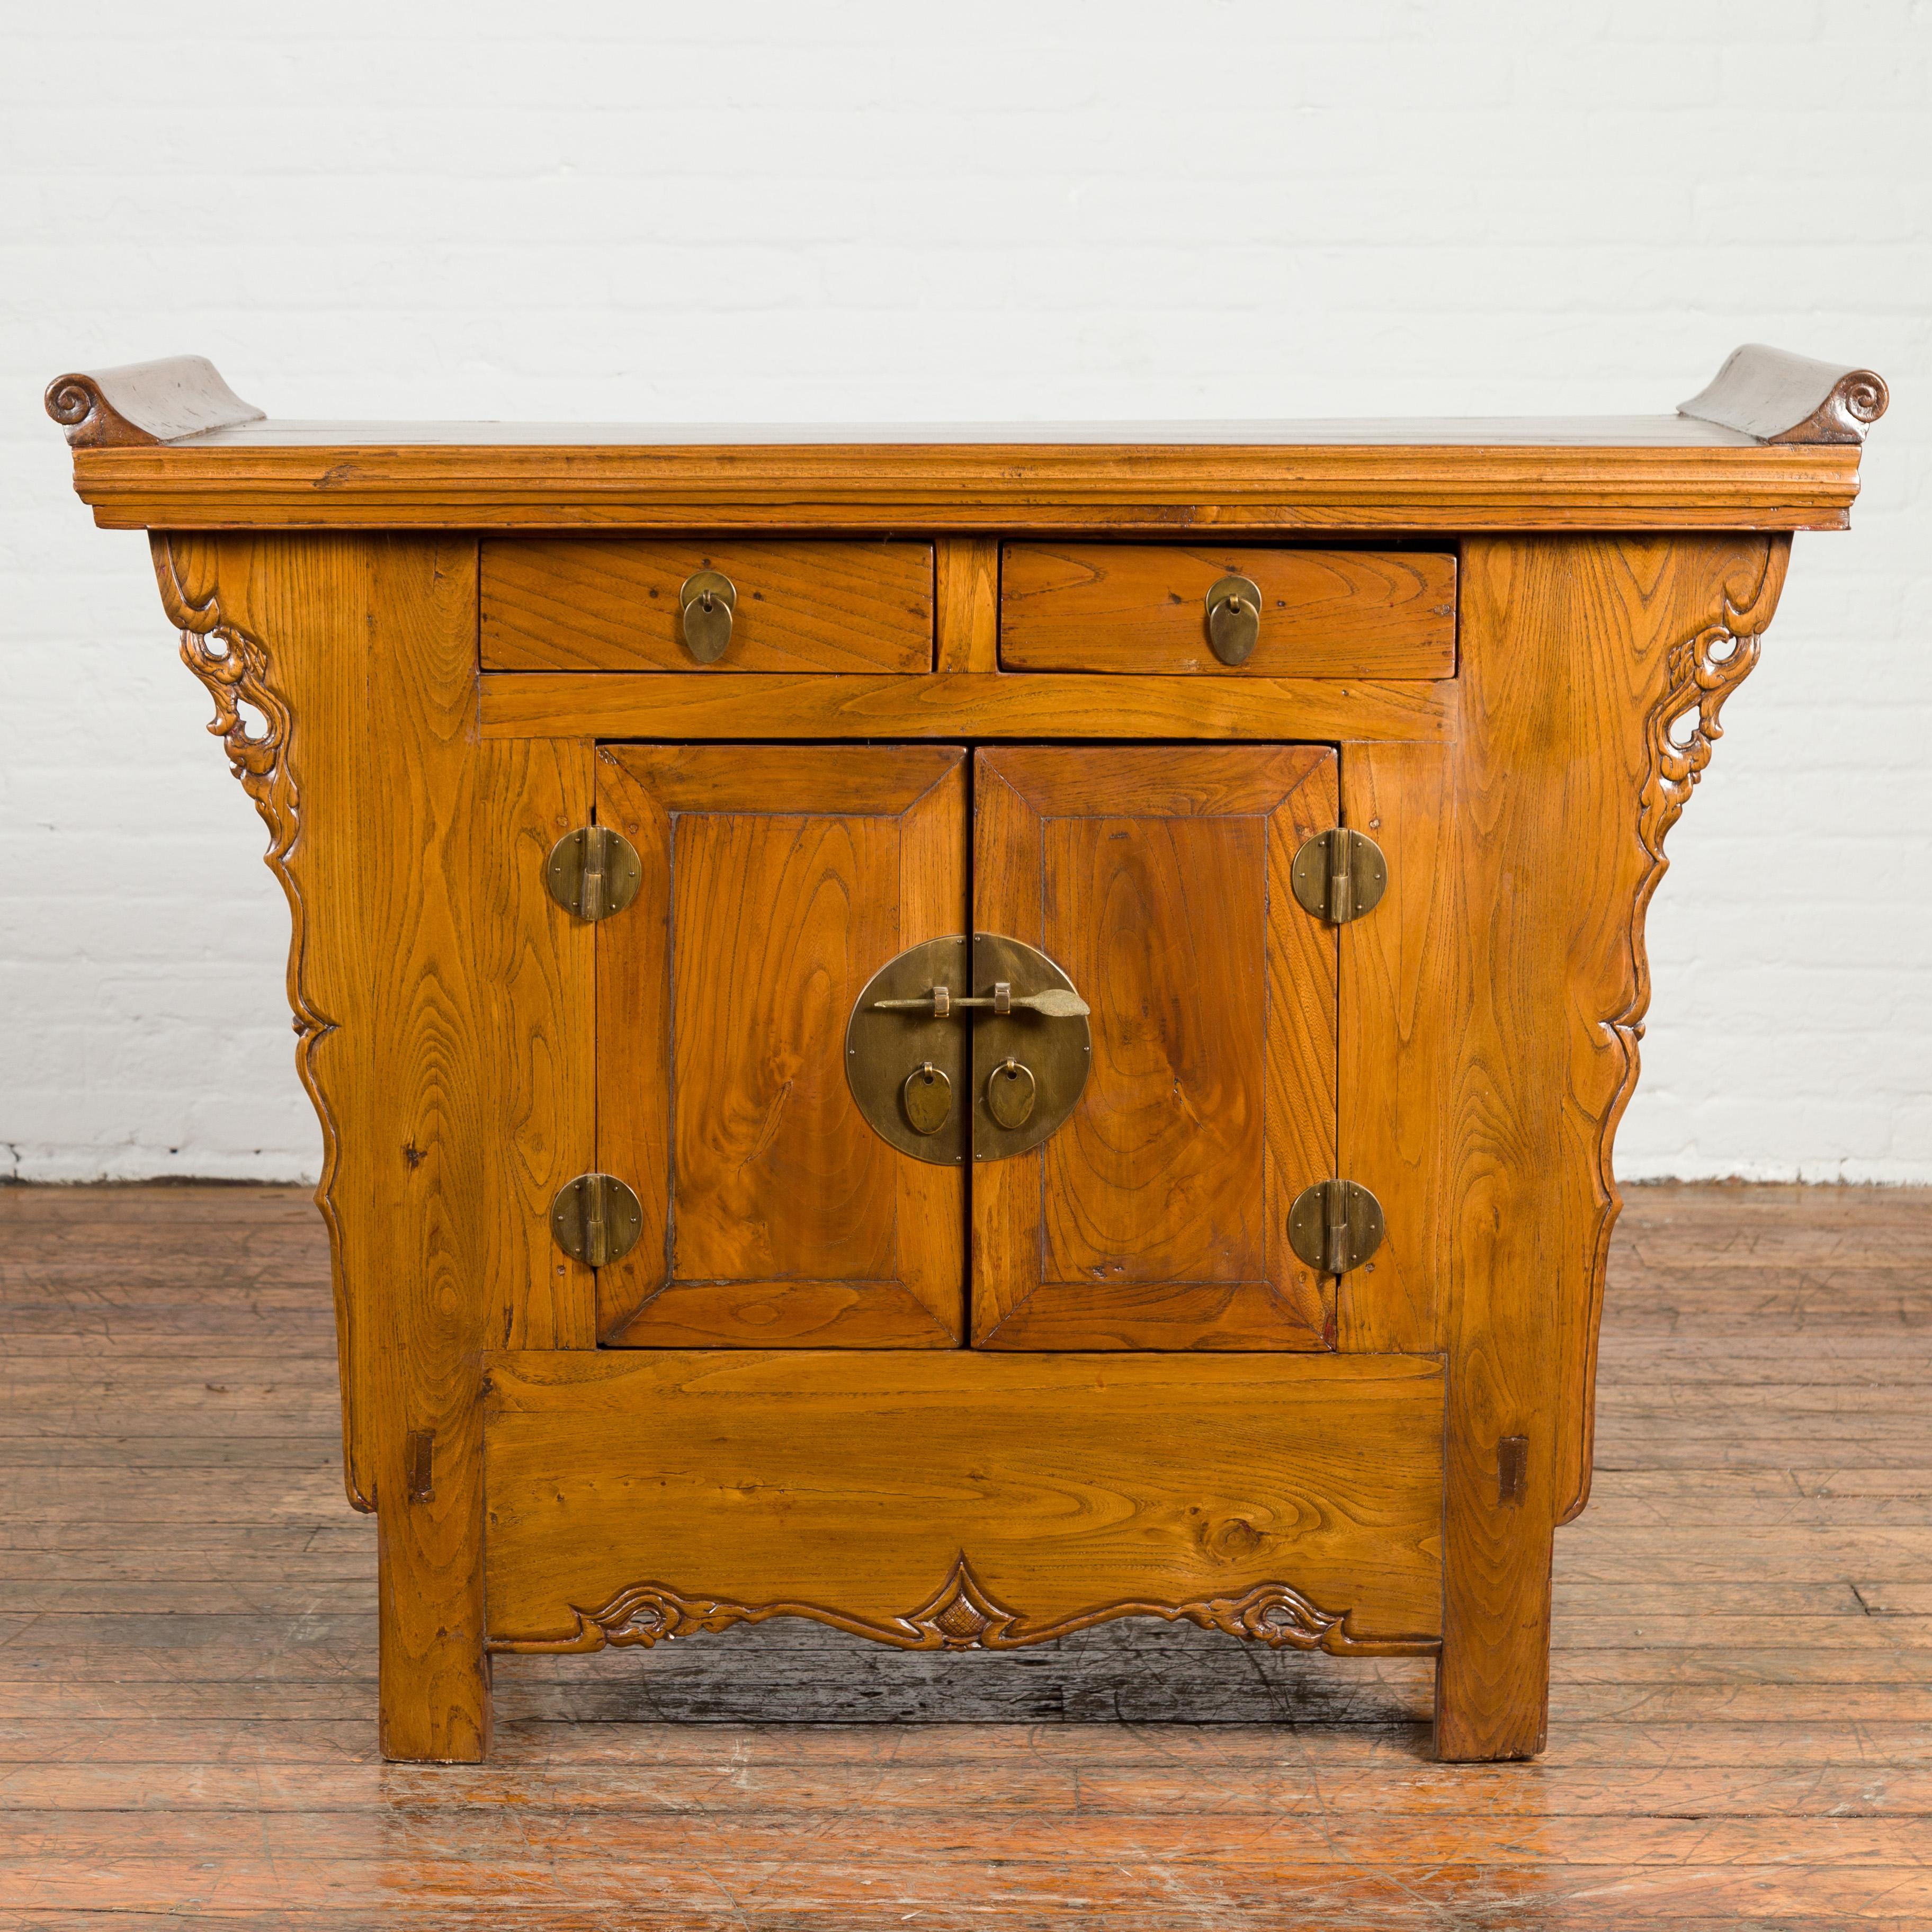 A Chinese Qing dynasty period altar cabinet from the 19th century, with natural finish, everted flanges, two drawers over double doors and carved sides. Created in China during the 19th century, this Chinese altar cabinet features a rectangular top